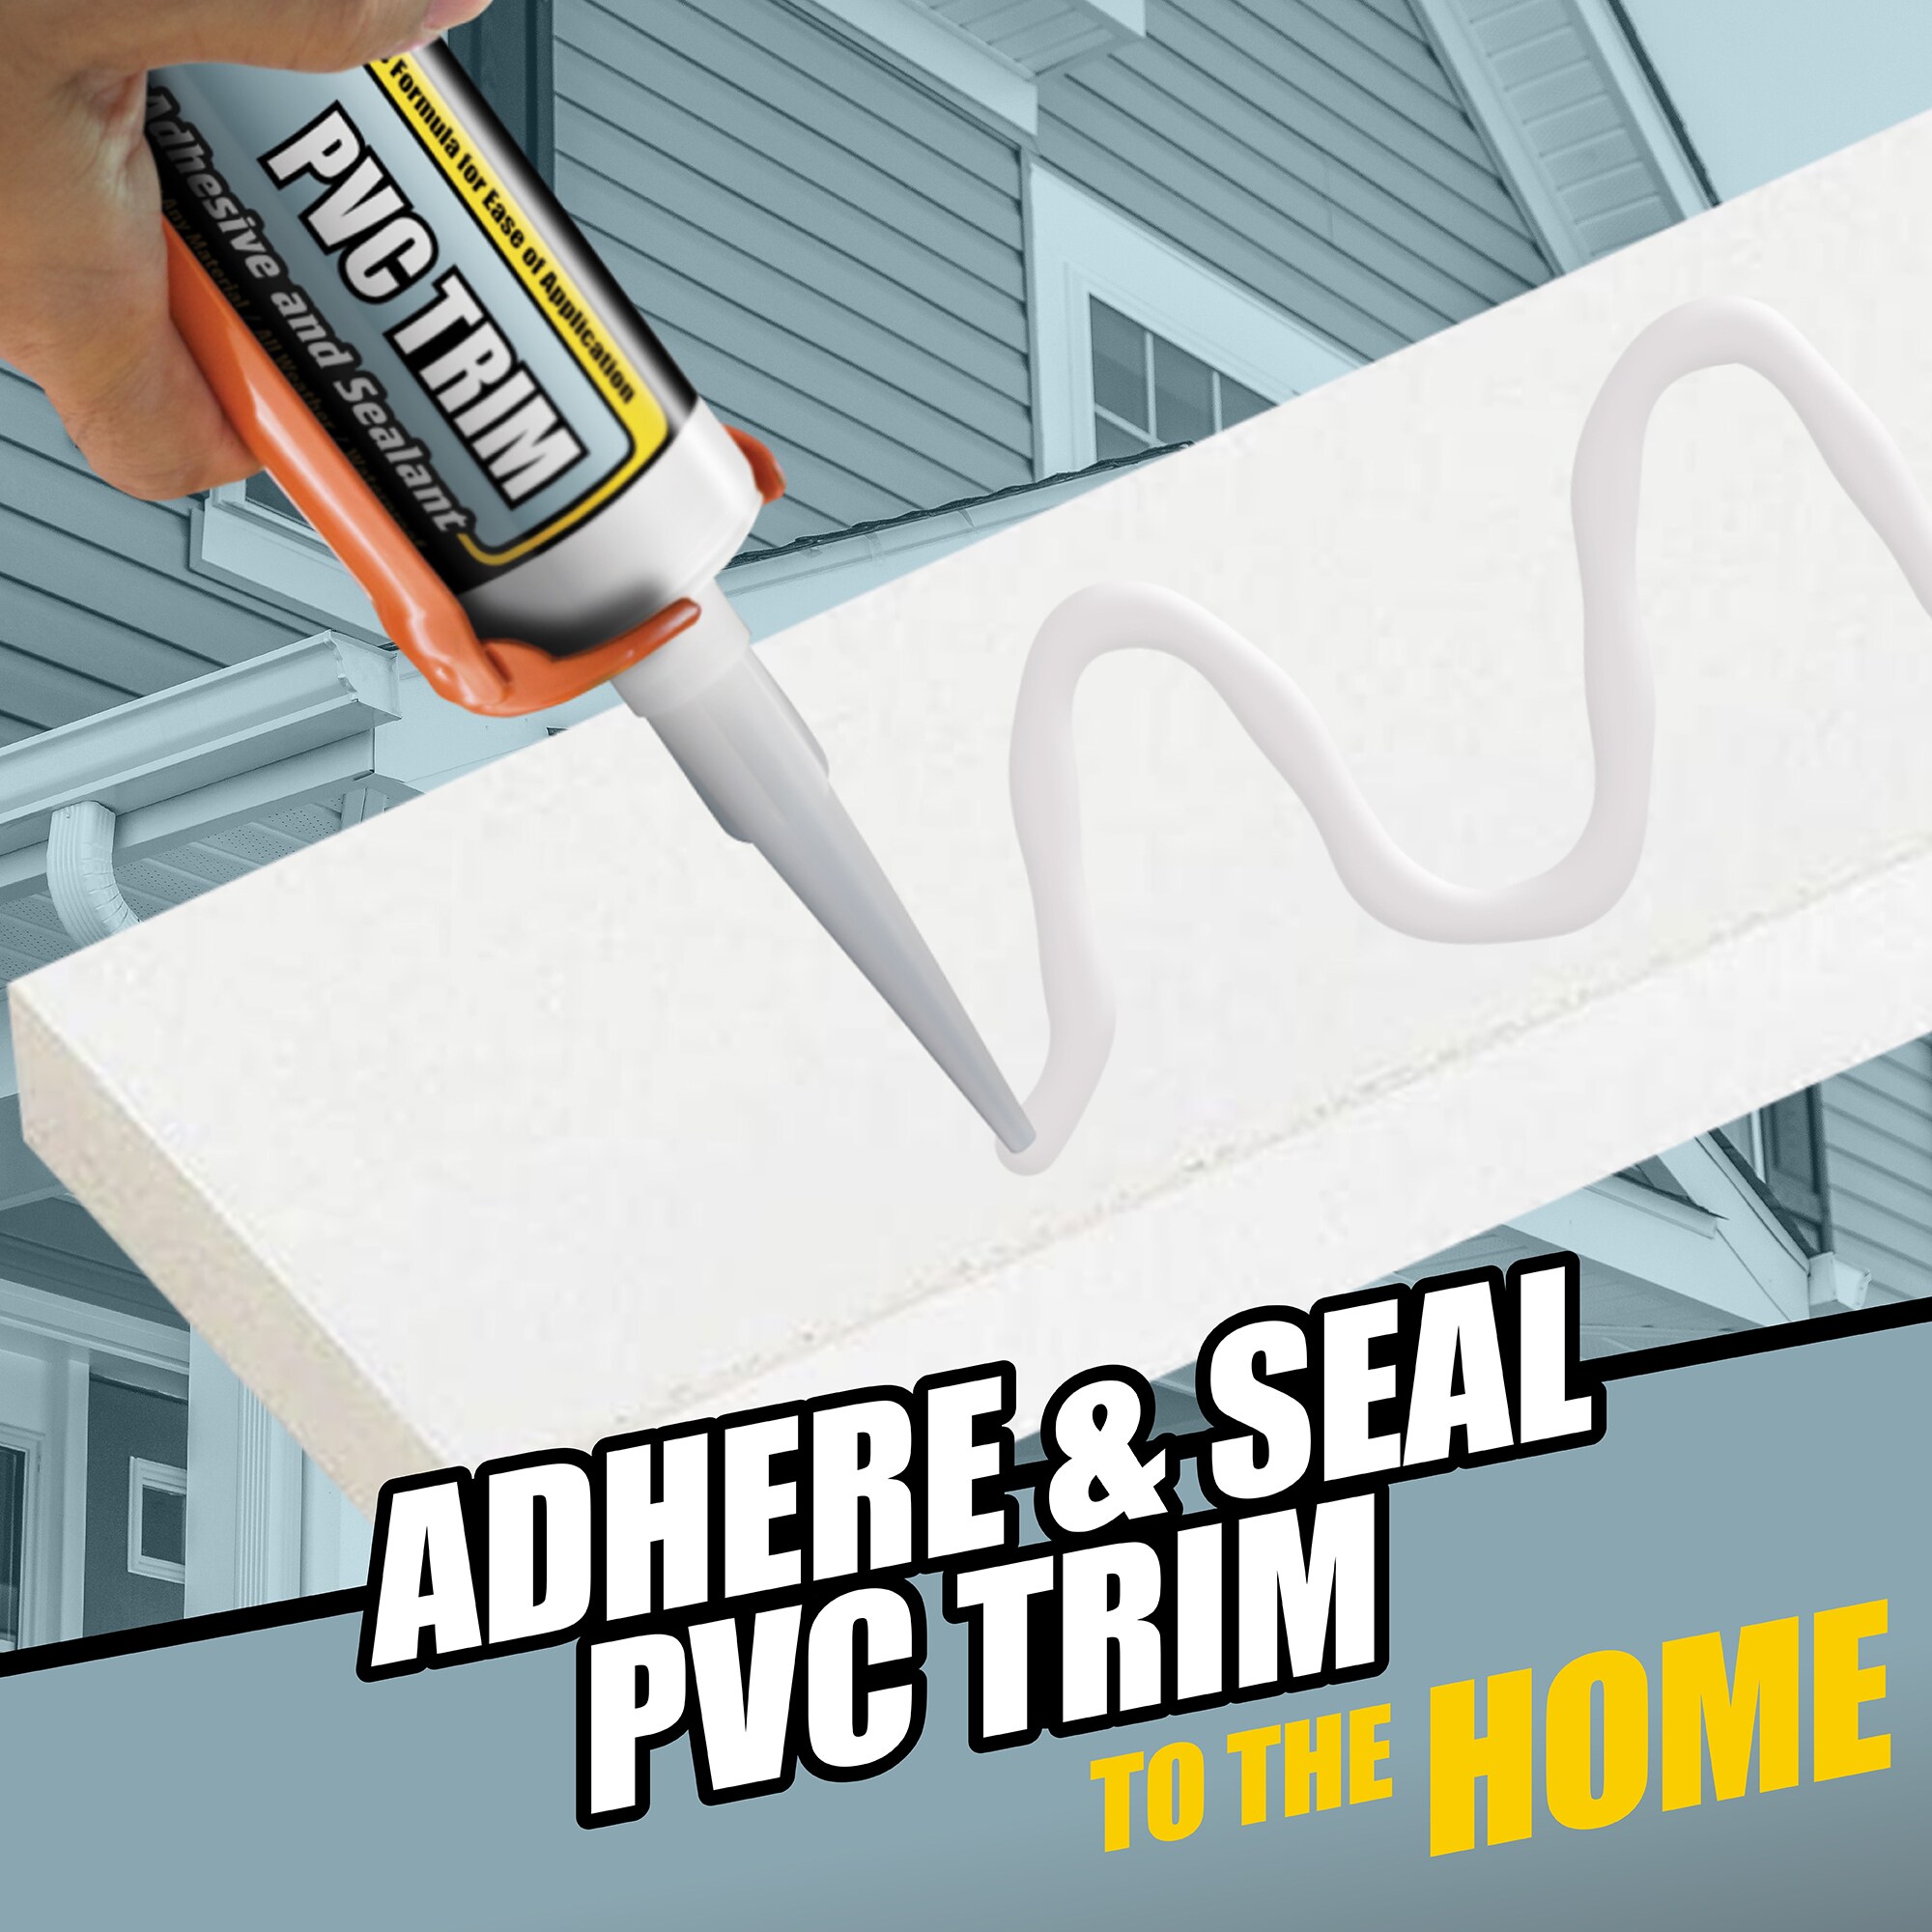 Titebond Ultimate PVC Trim White Polymer-based Interior/Exterior Construction Adhesive (Actual 